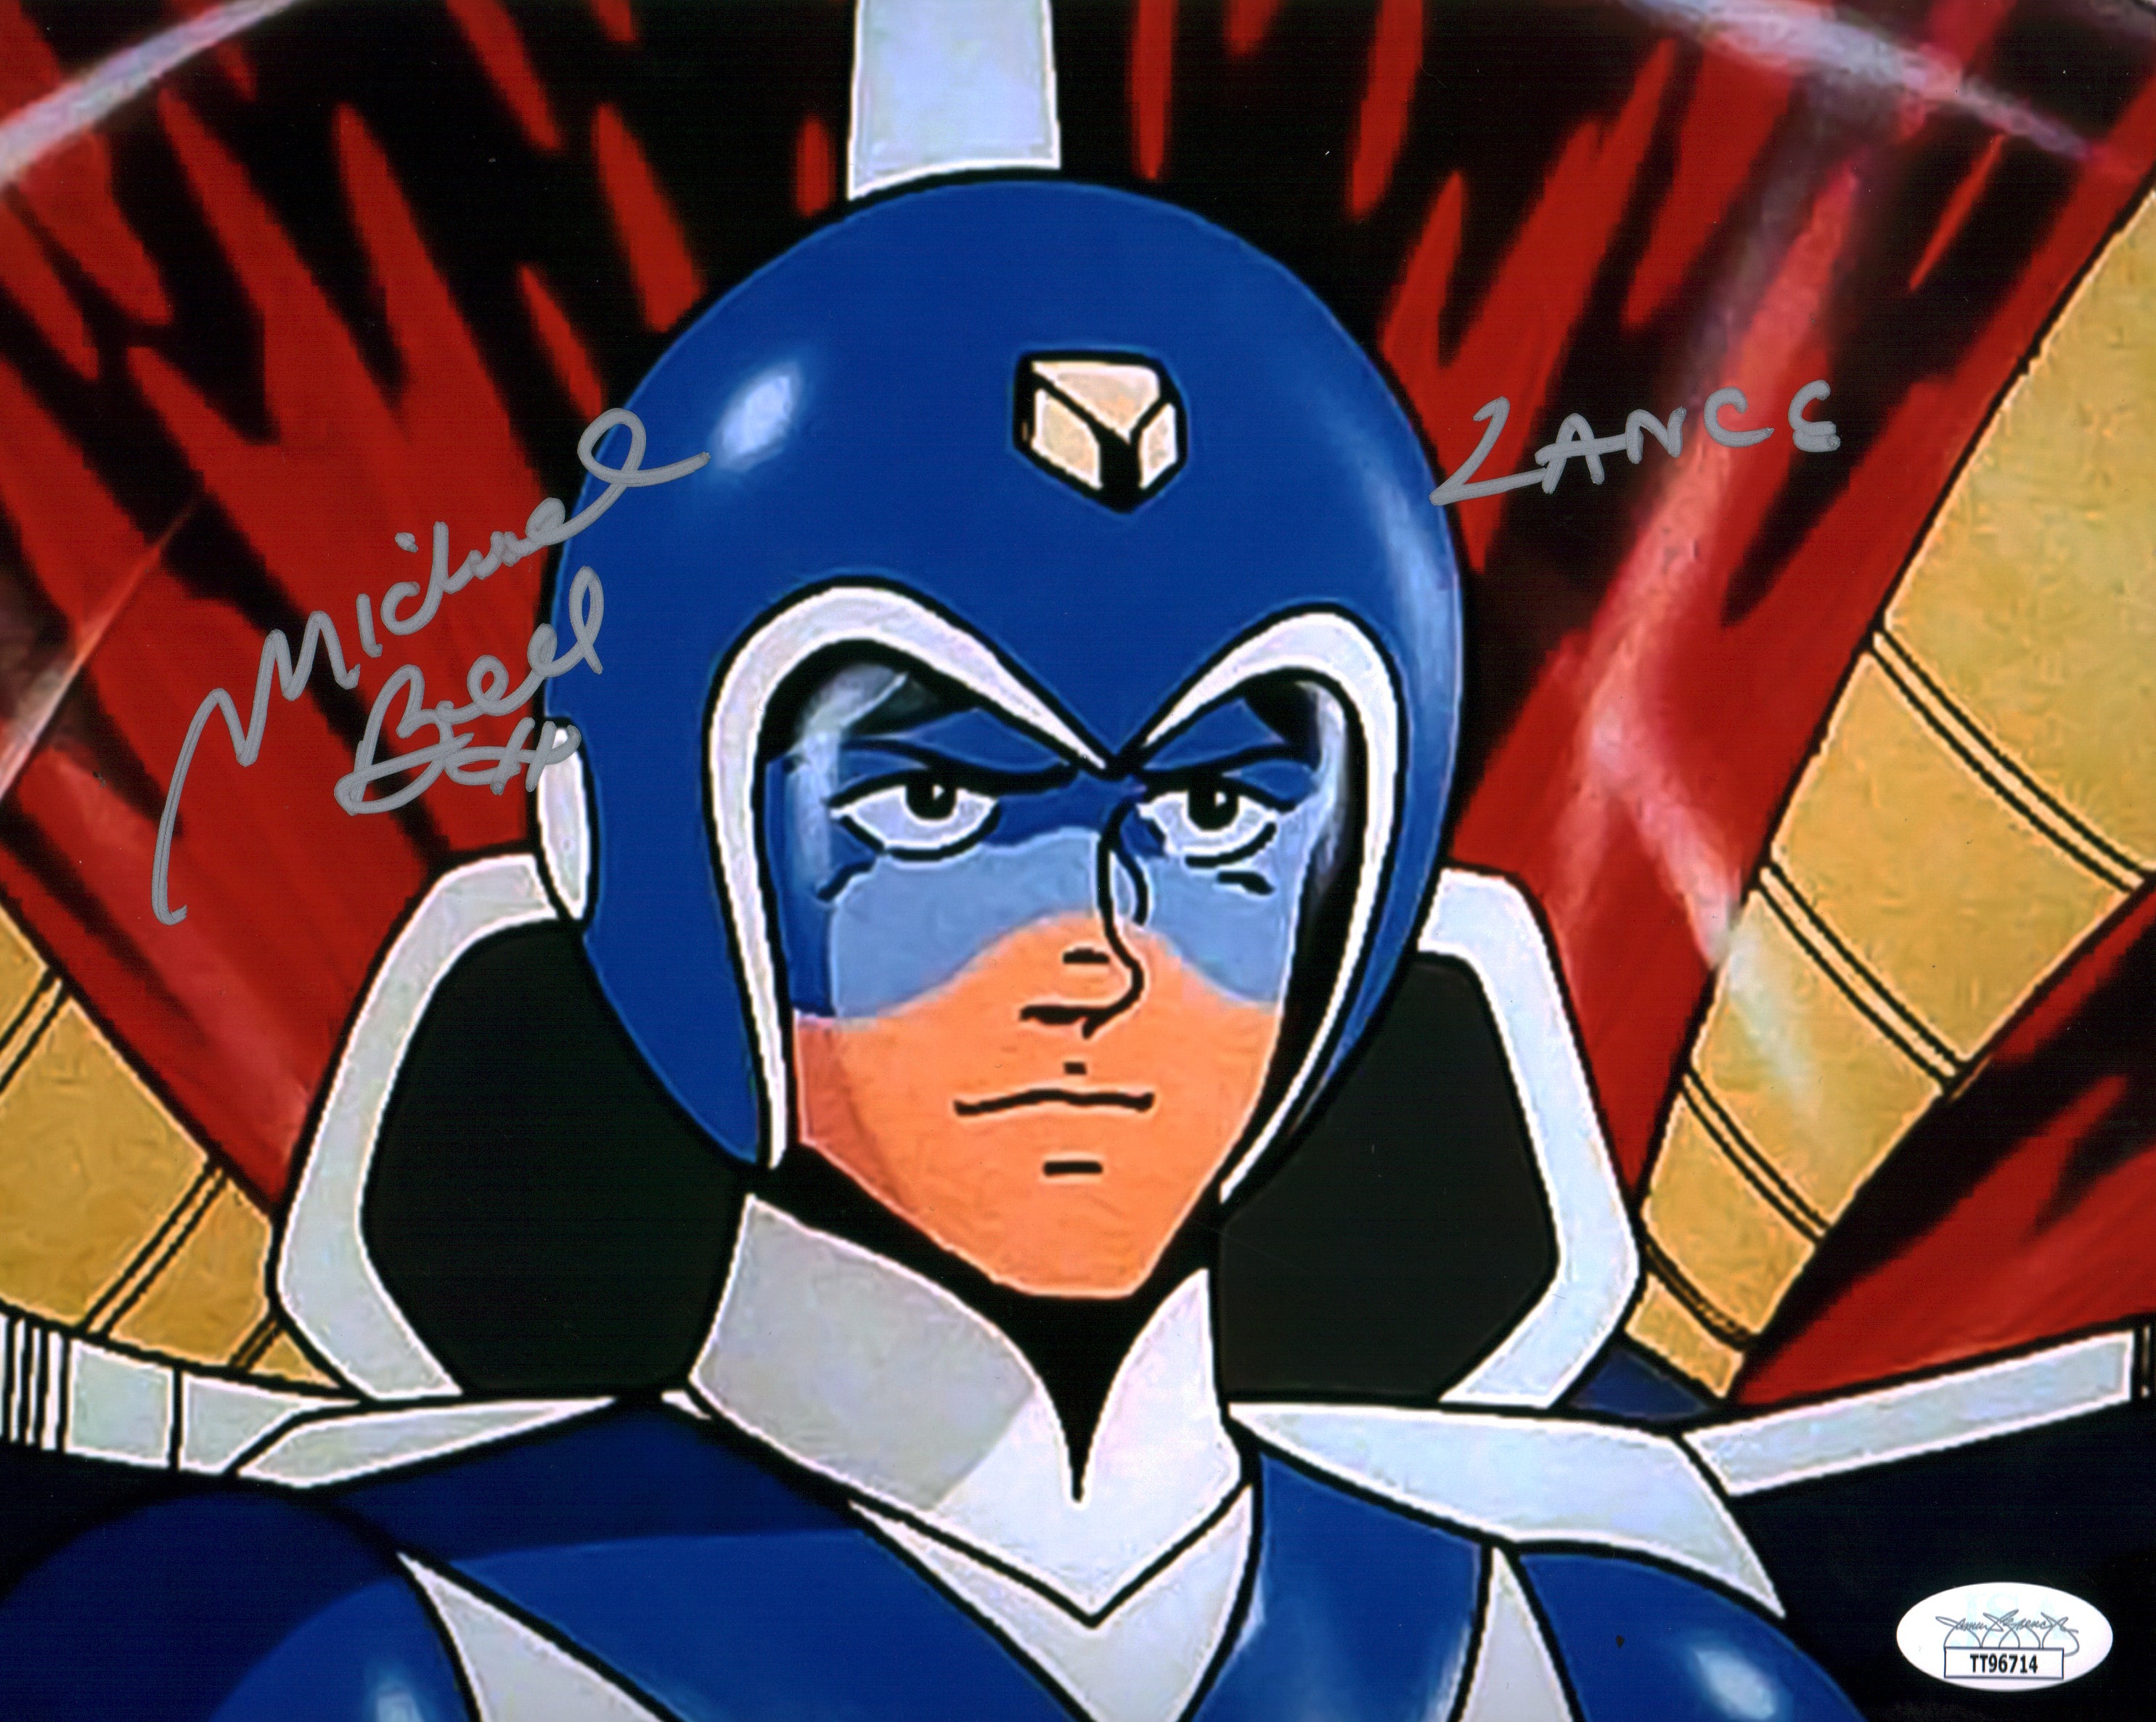 Michael Bell Voltron 8x10 Signed Photo JSA COA Certified Autograph GalaxyCon